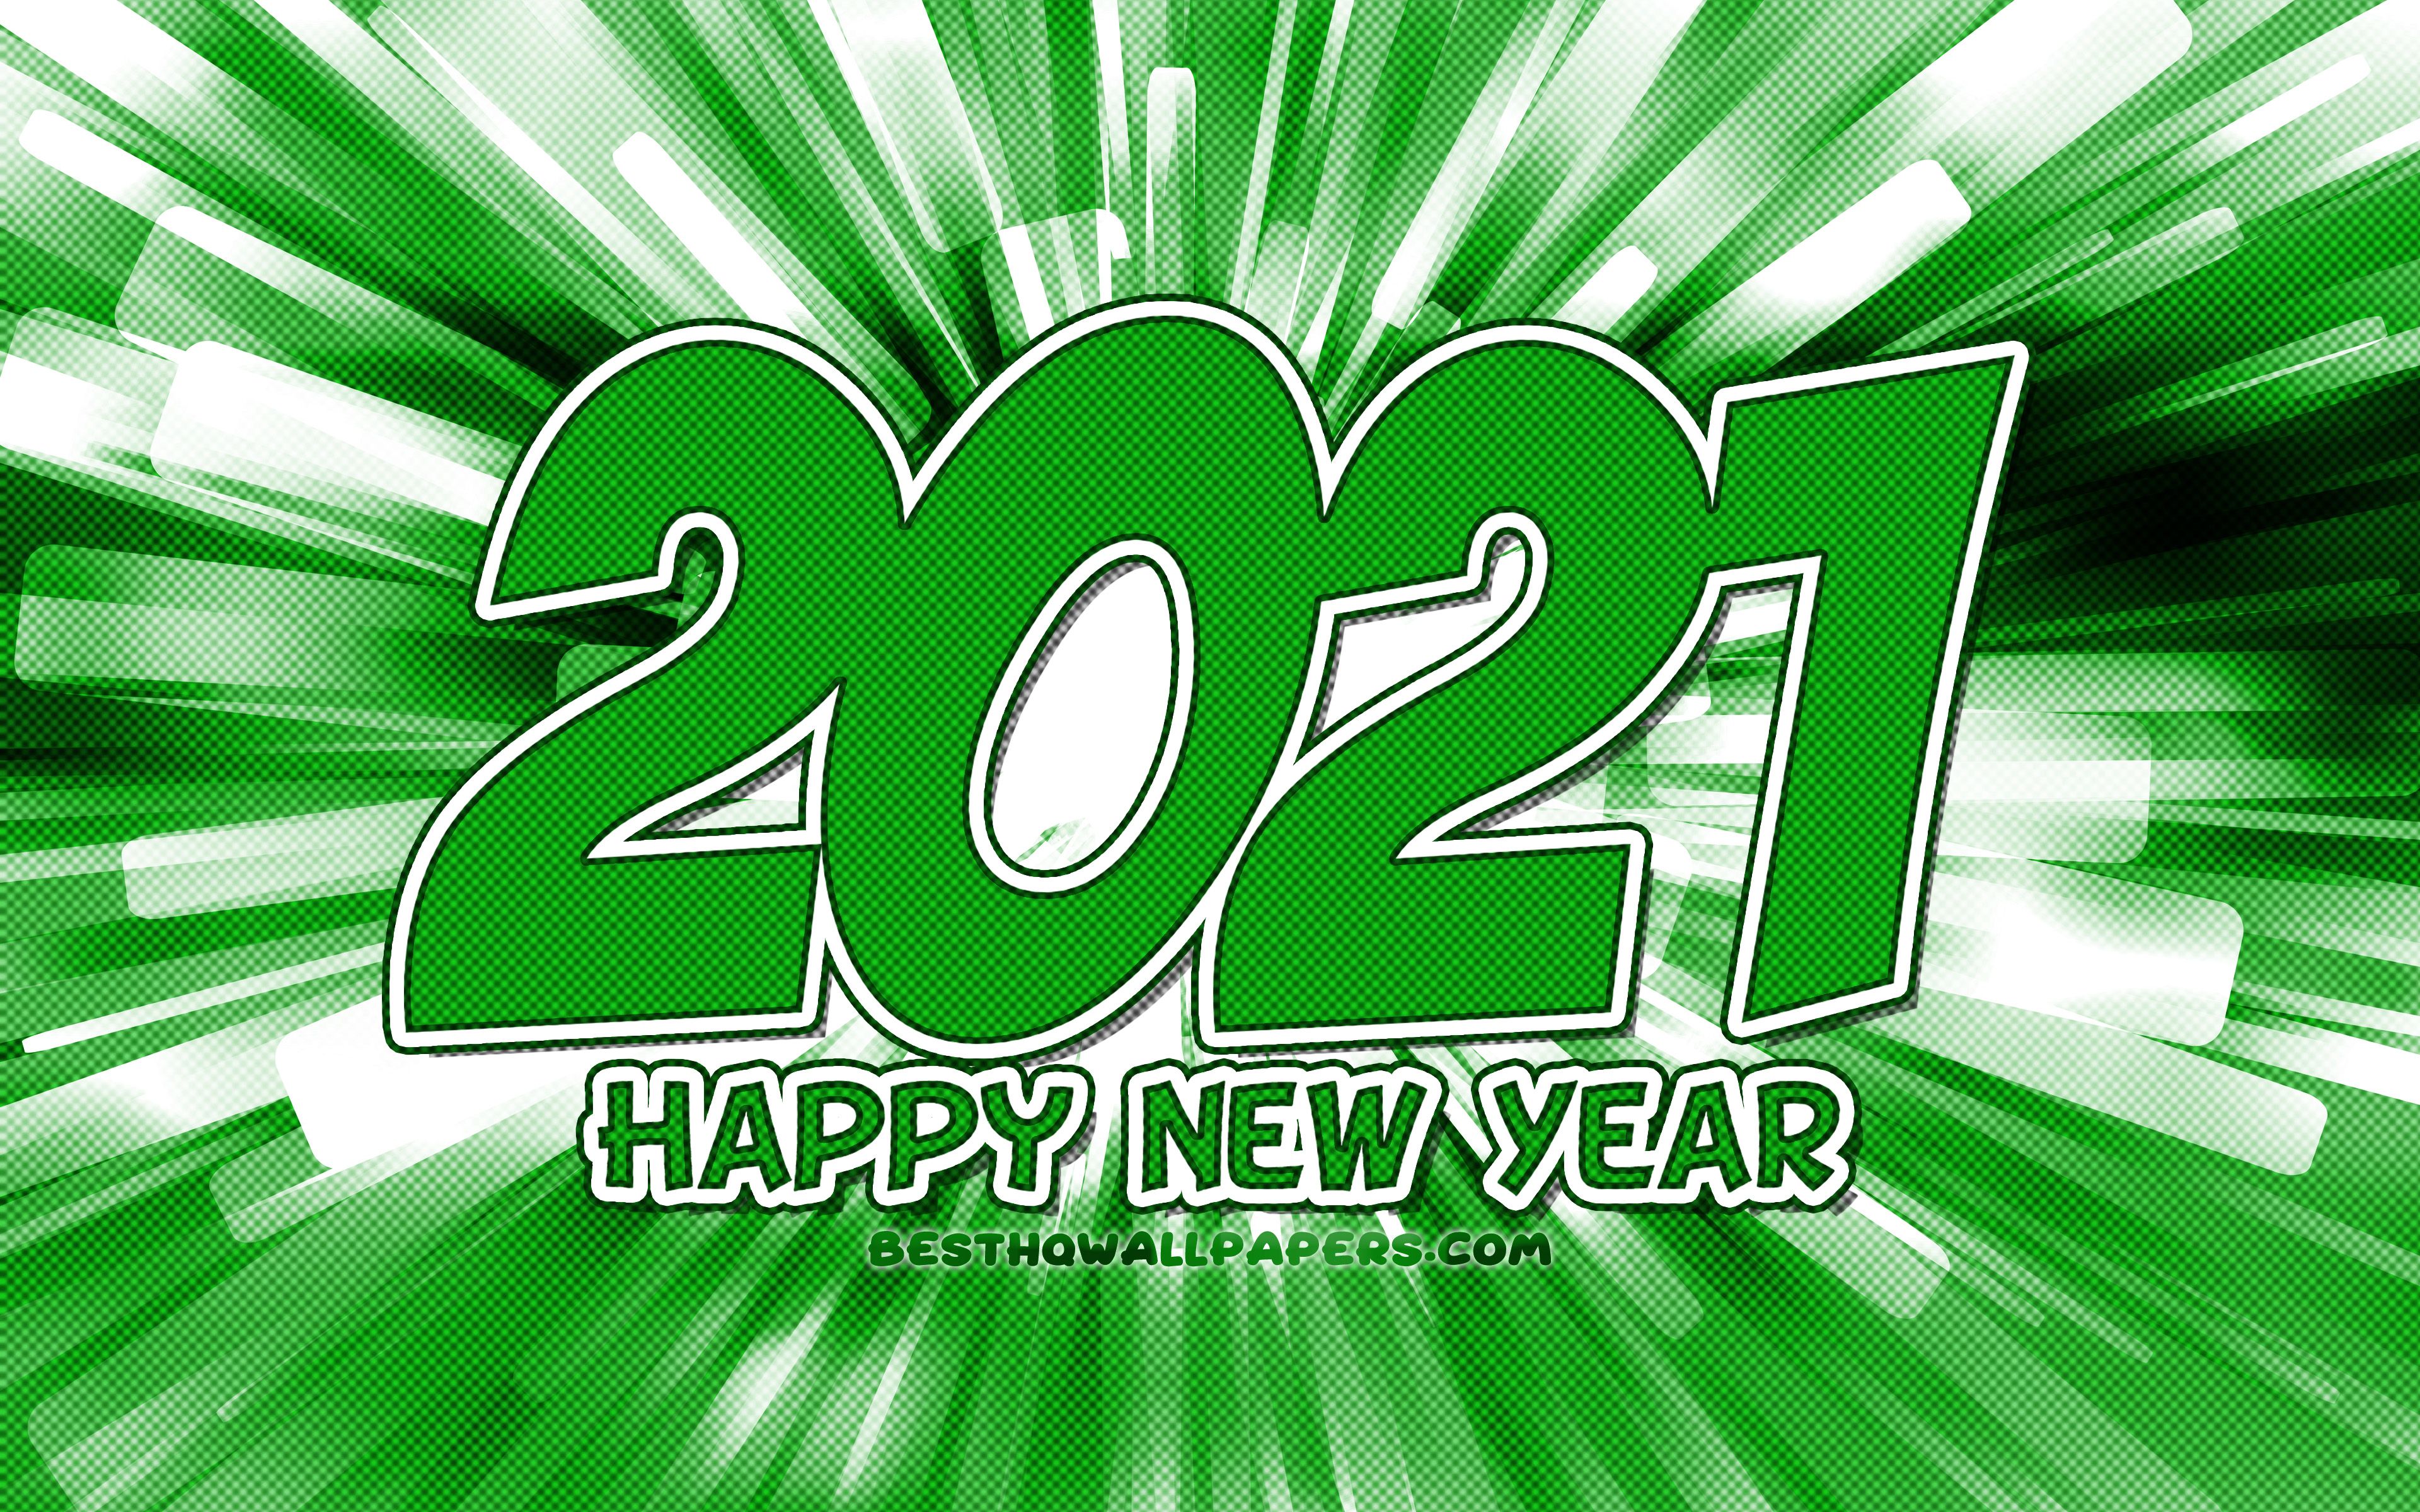 Download wallpapers Happy New Year 2021, 4k, green abstract rays, 2021 green digits, 2021 concepts, 2021 on green background, 2021 year digits for desktop with resolution 3840x2400. High Quality HD pictures wallpapers